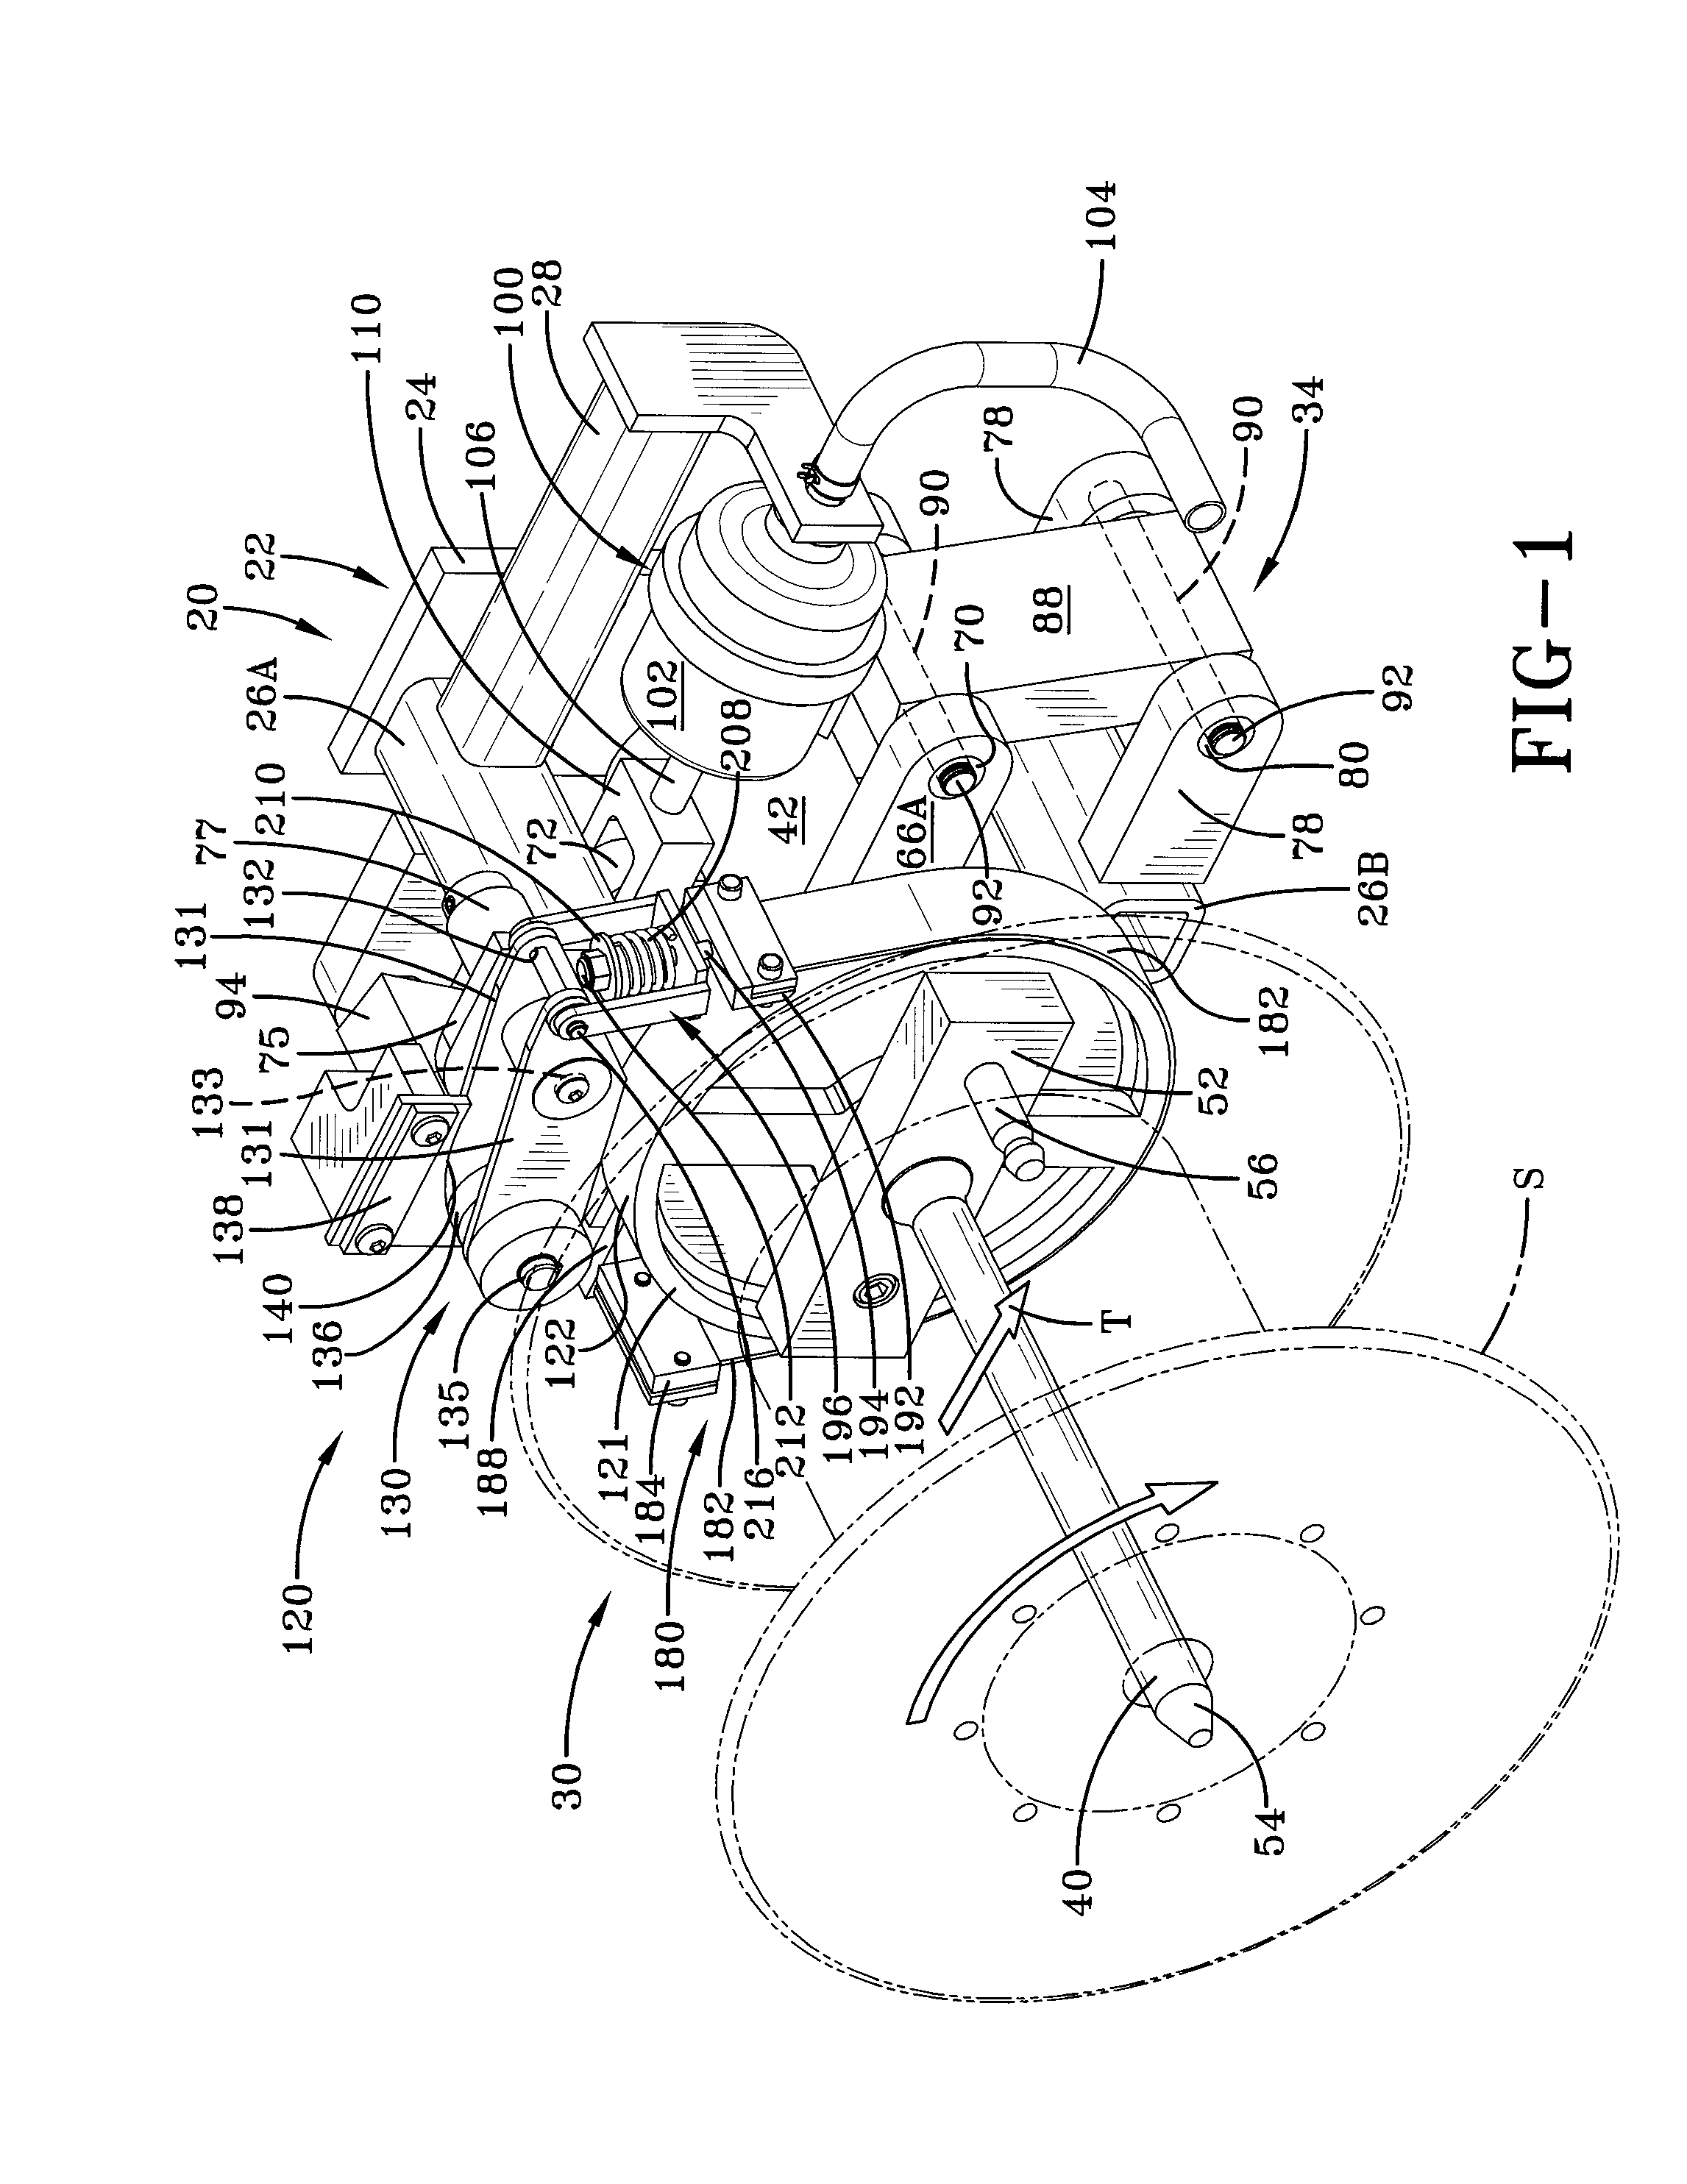 Self-compensating filament tension control device with friction band braking